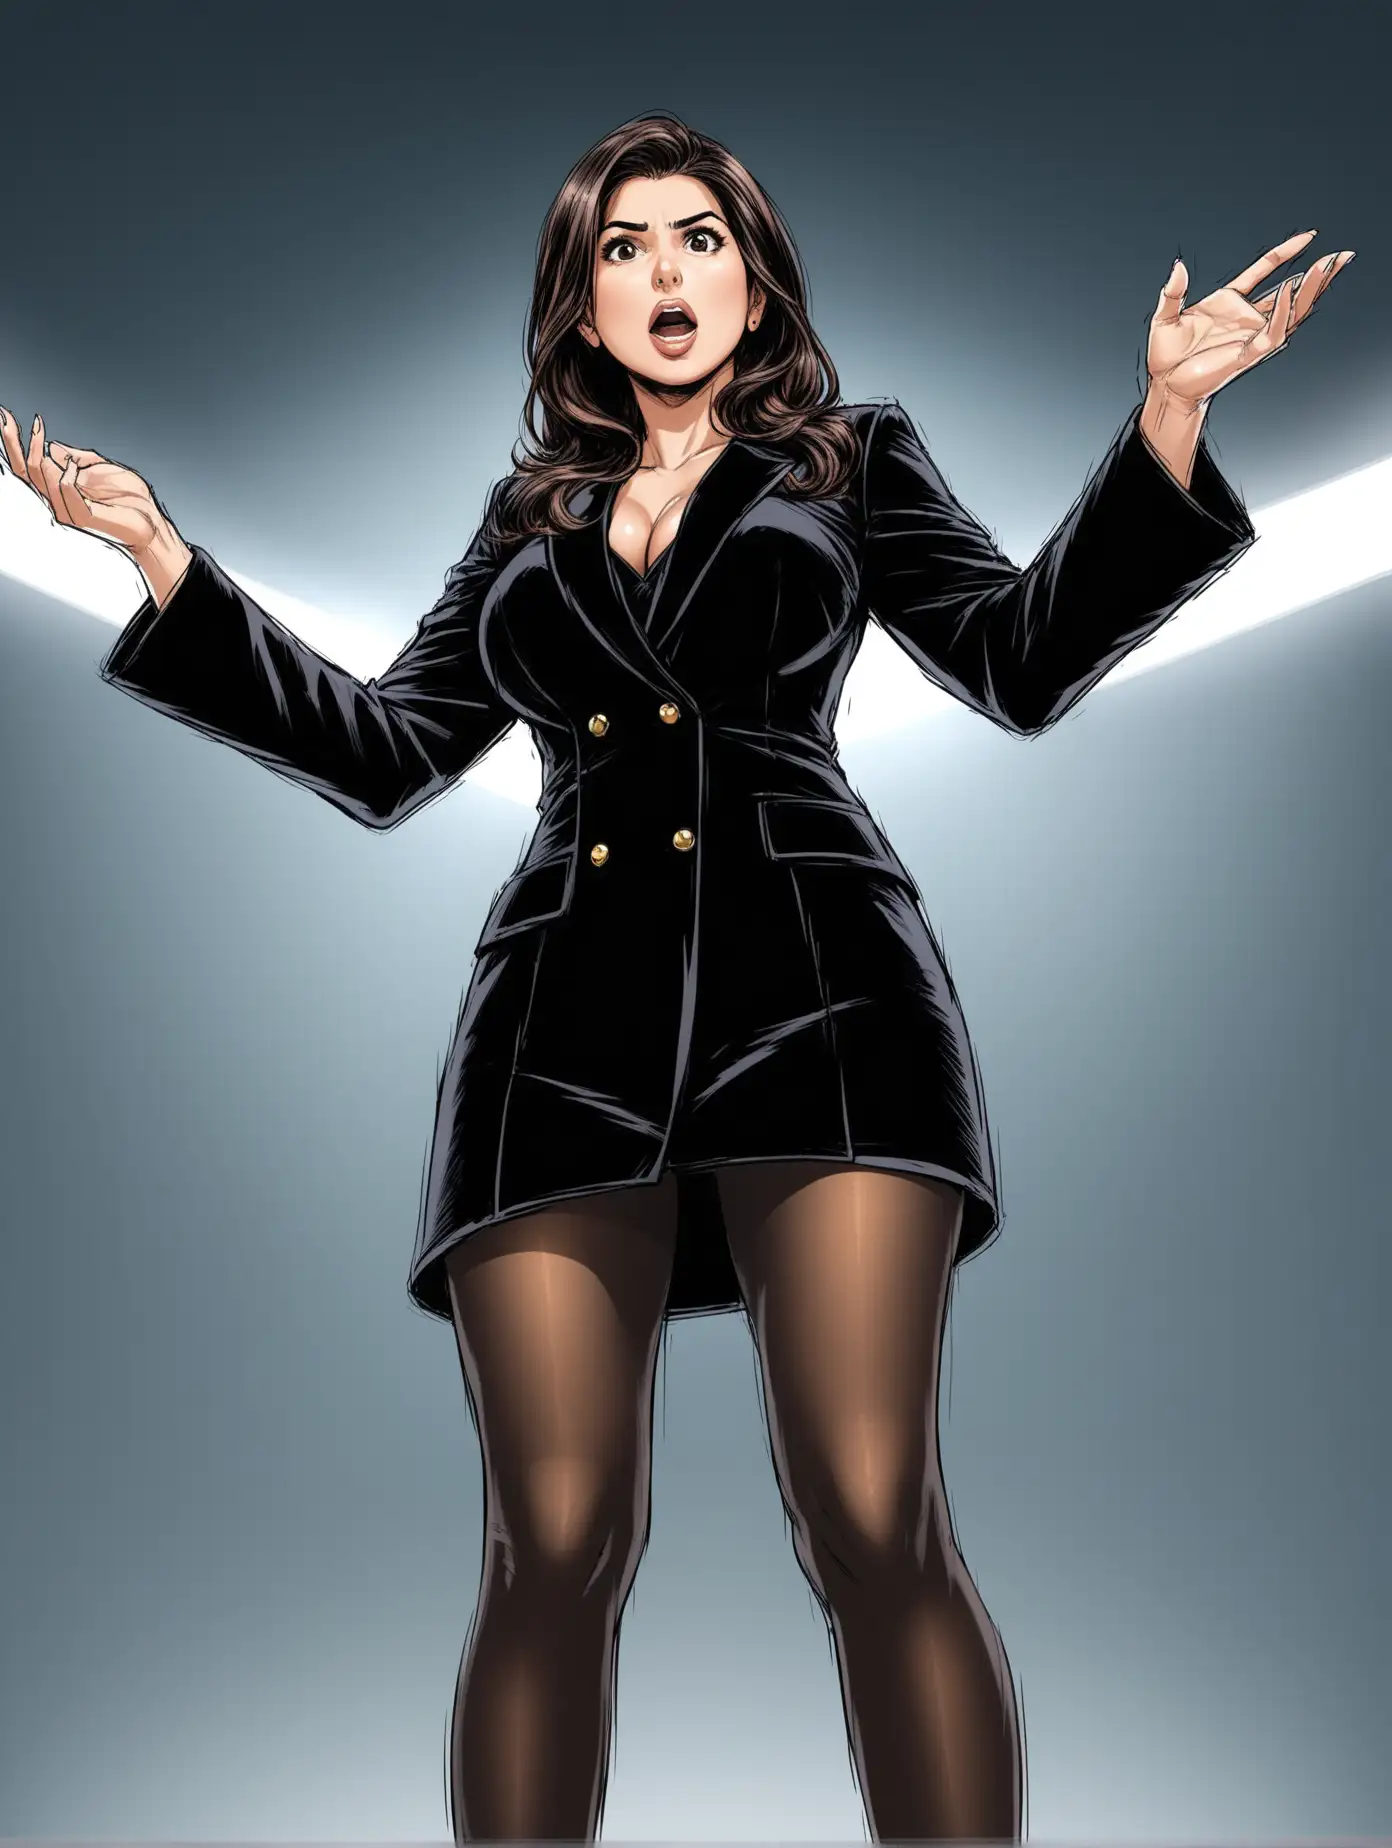 Rudabeh shahbazi, KCAL News, news anchor, Los Angeles, Highly Detailed, studio, wearing Black velvet (non)smoking jacket as a dress, pantyhose, standing at touchscreen, DC comic art style, realistic, below angle, wide stance disbelief 